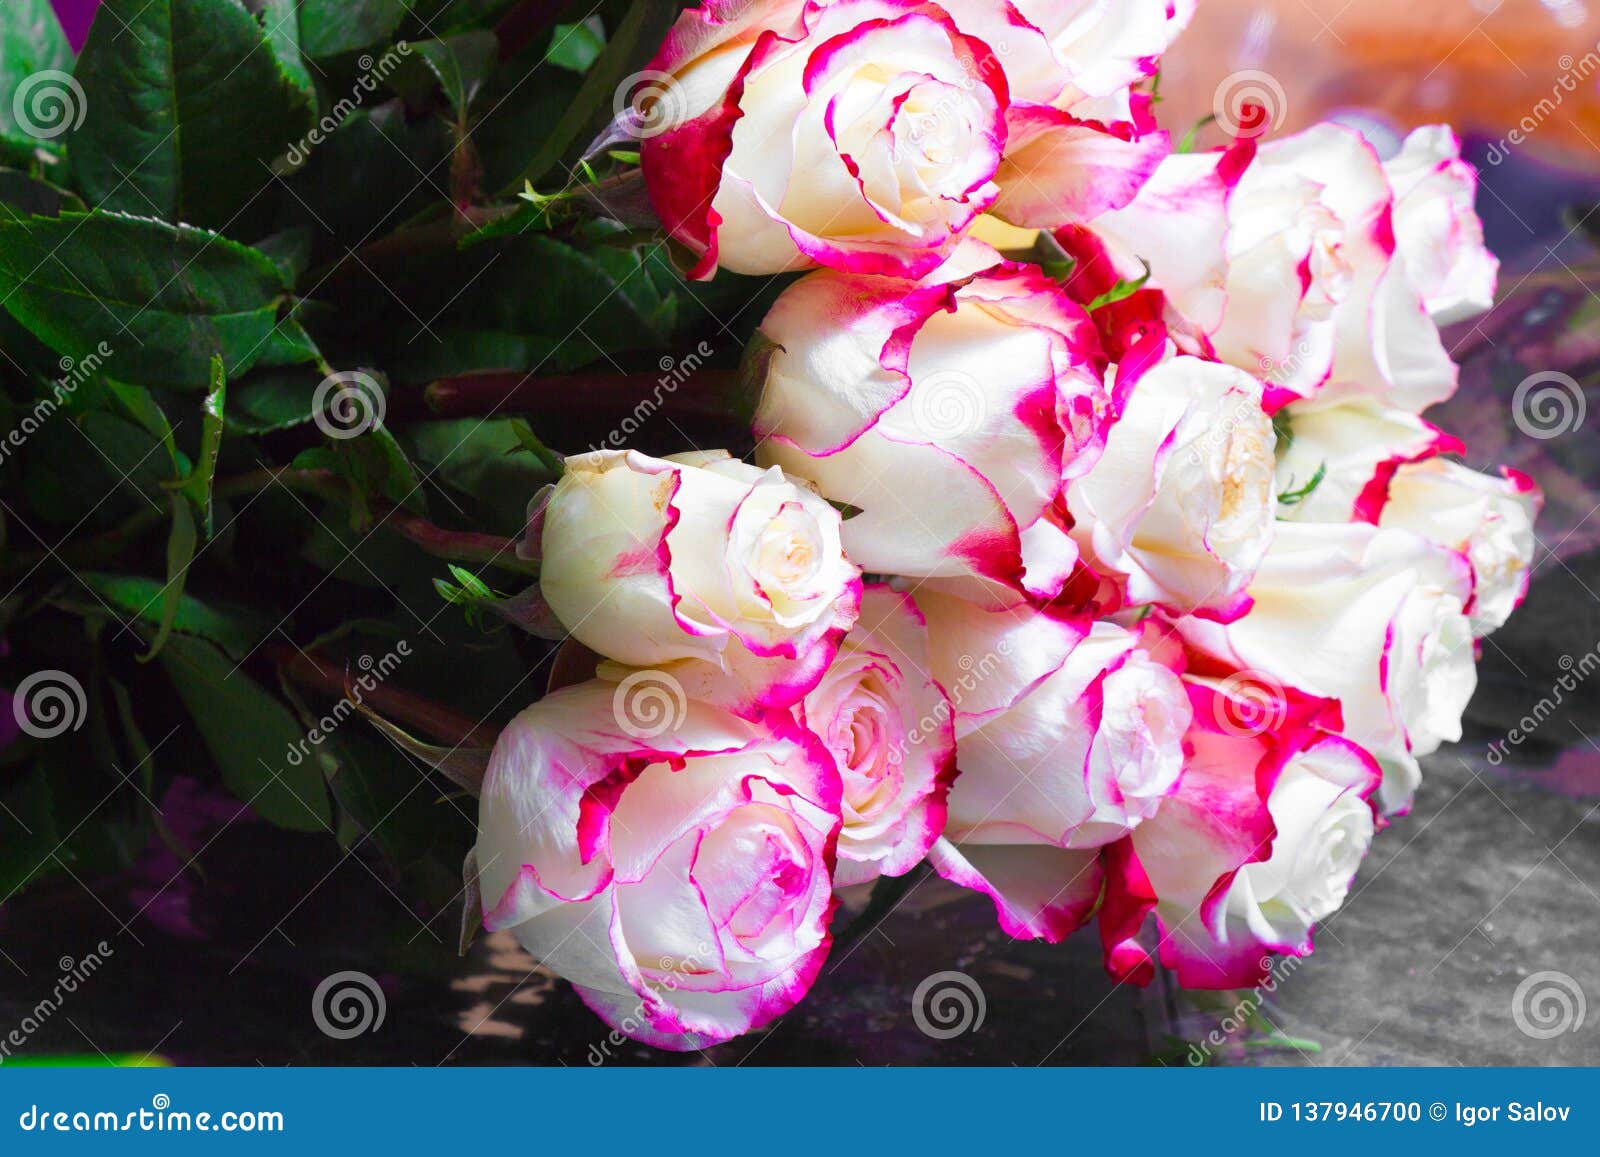 A Bouquet of White Roses with Pink Edging Stock Photo - Image of mothers,  beauty: 137946700